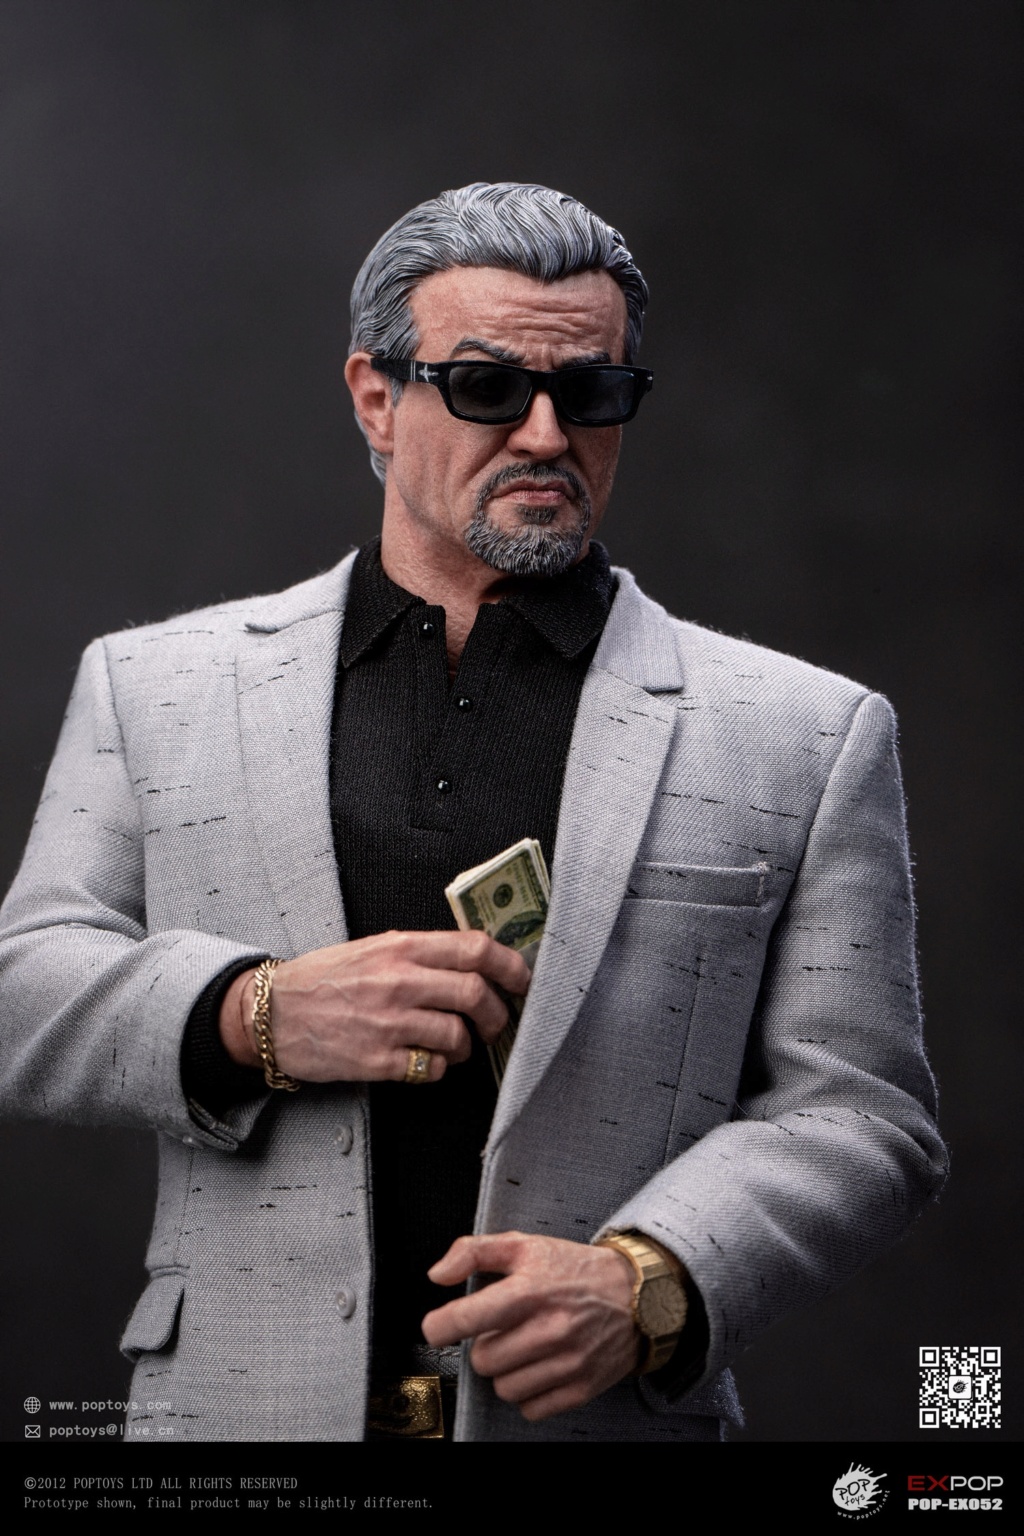 newproduct - NEW PRODUCT: POPTOYS: EX052 1/6 Scale The King of Gangs (Tulsa King) 19054110